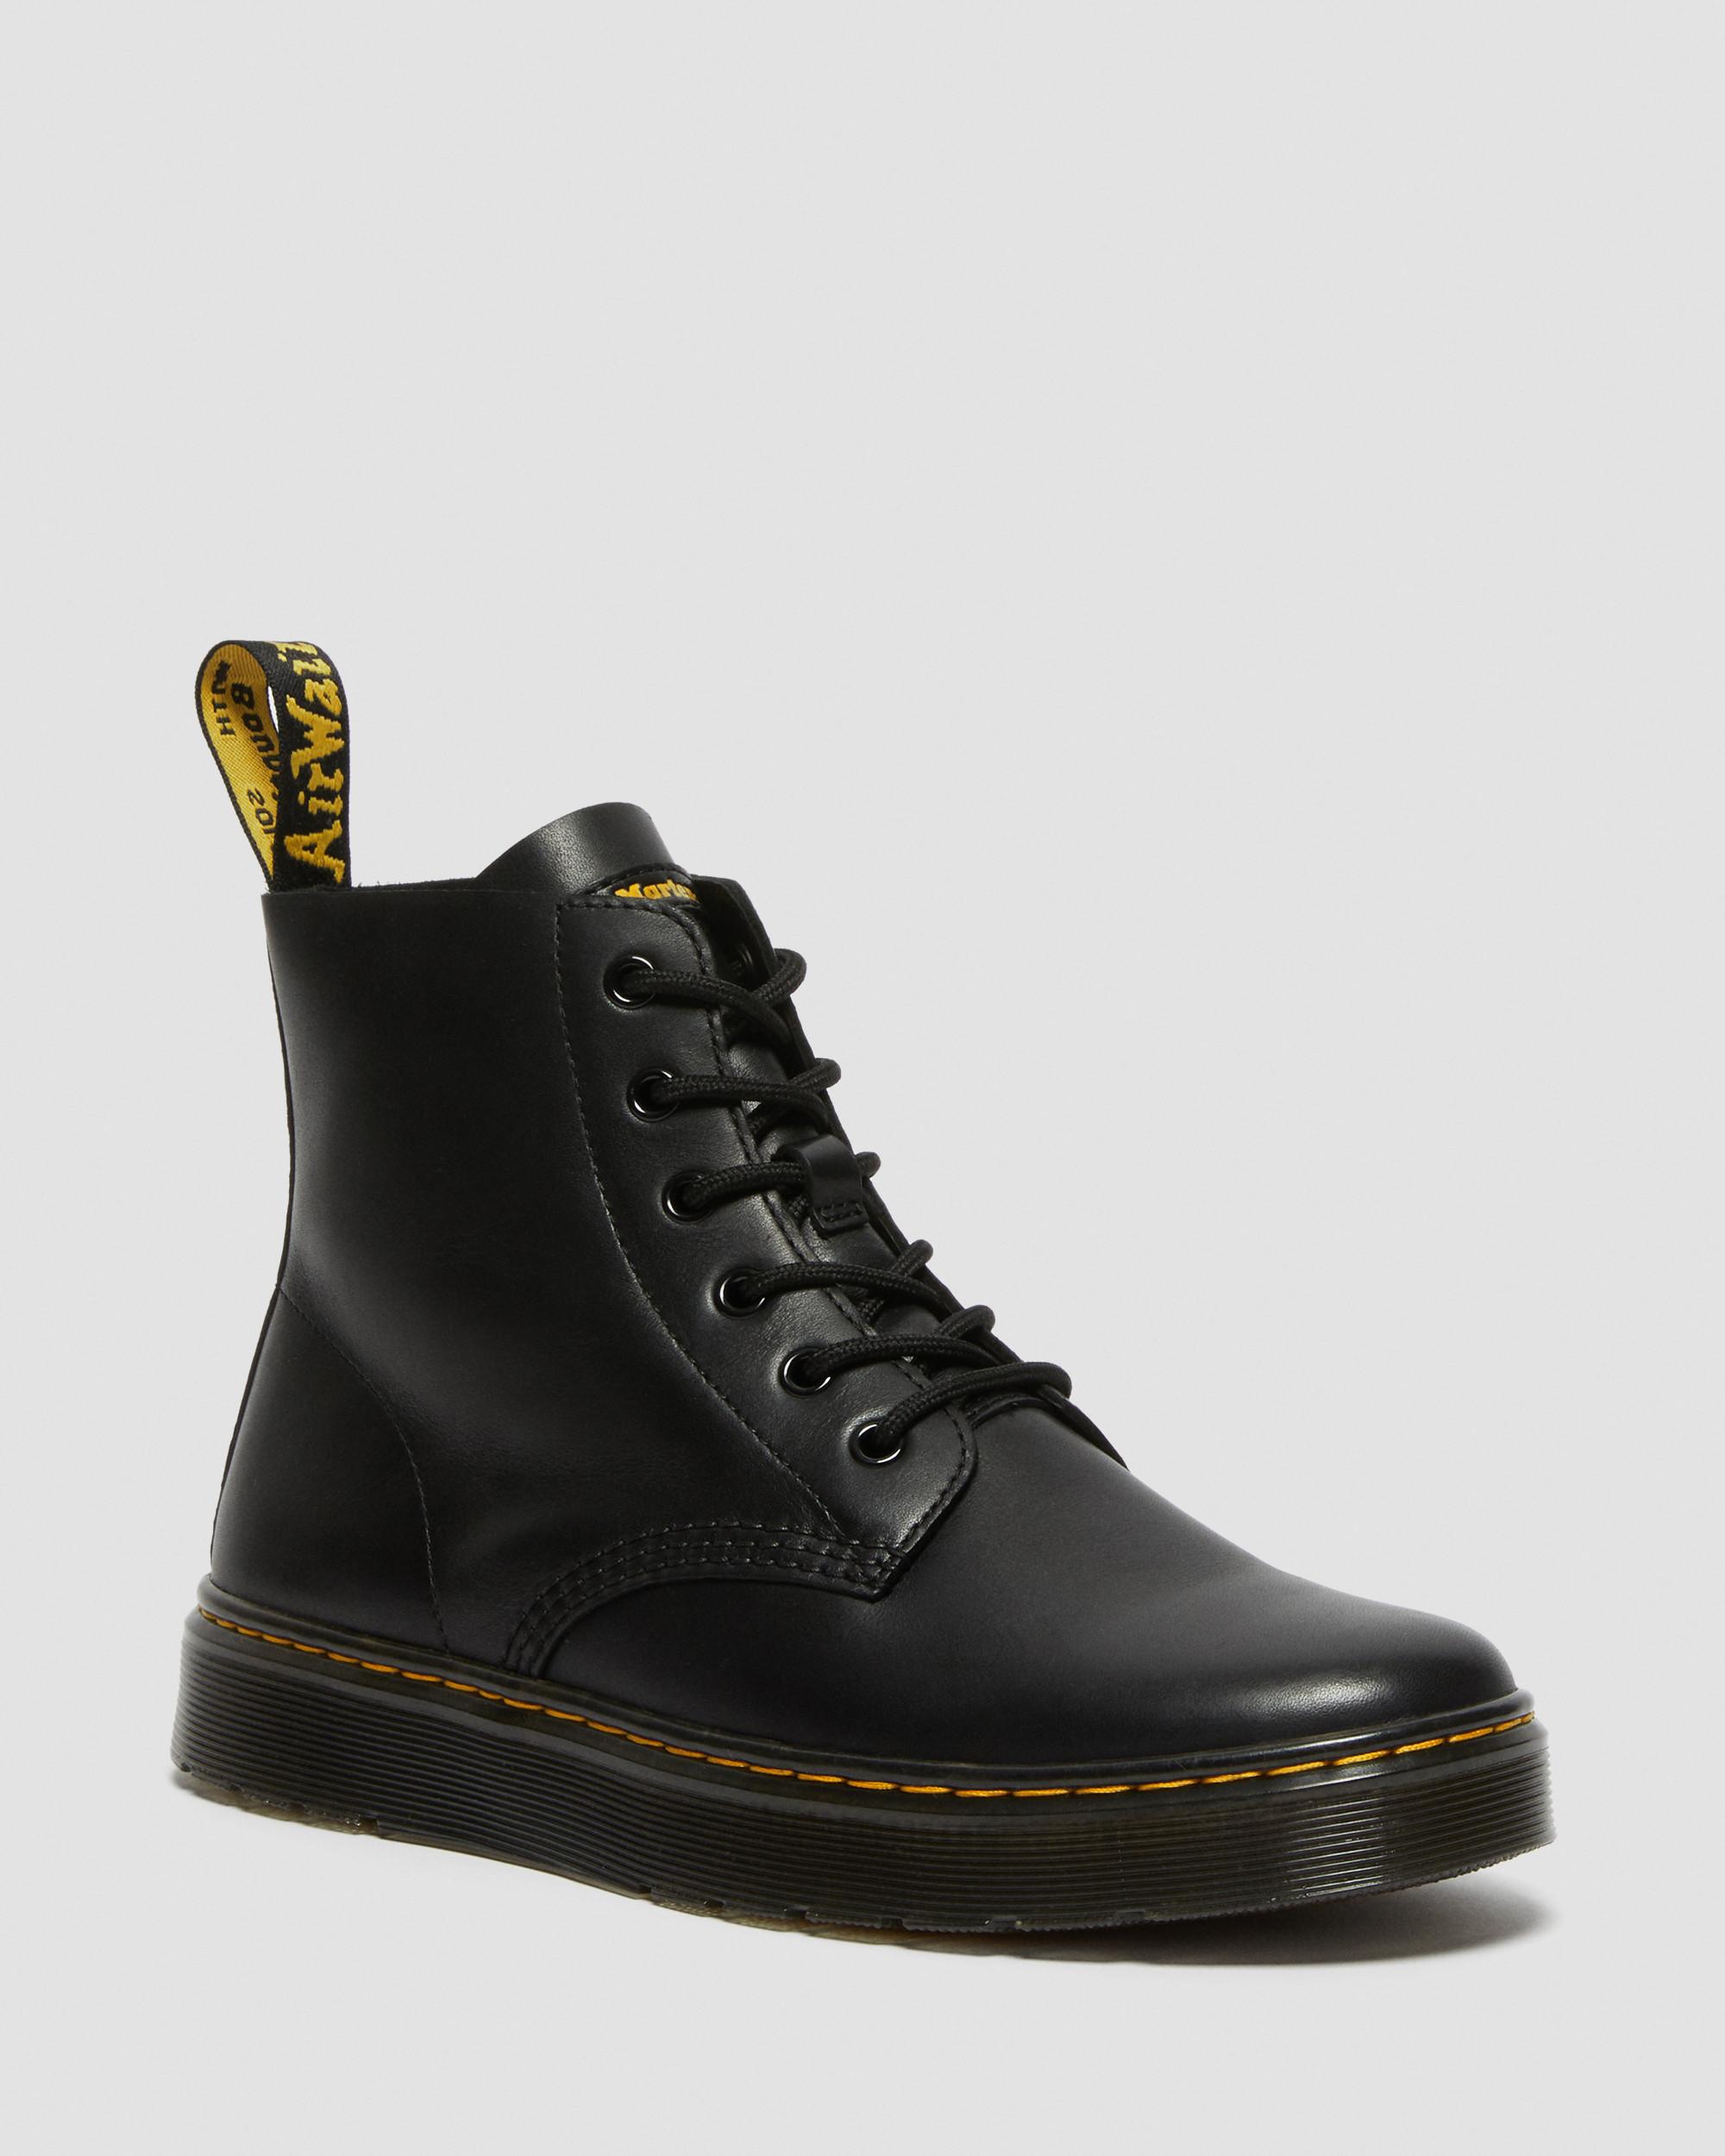 Thurston Lusso Leather Chukka Boots in Black